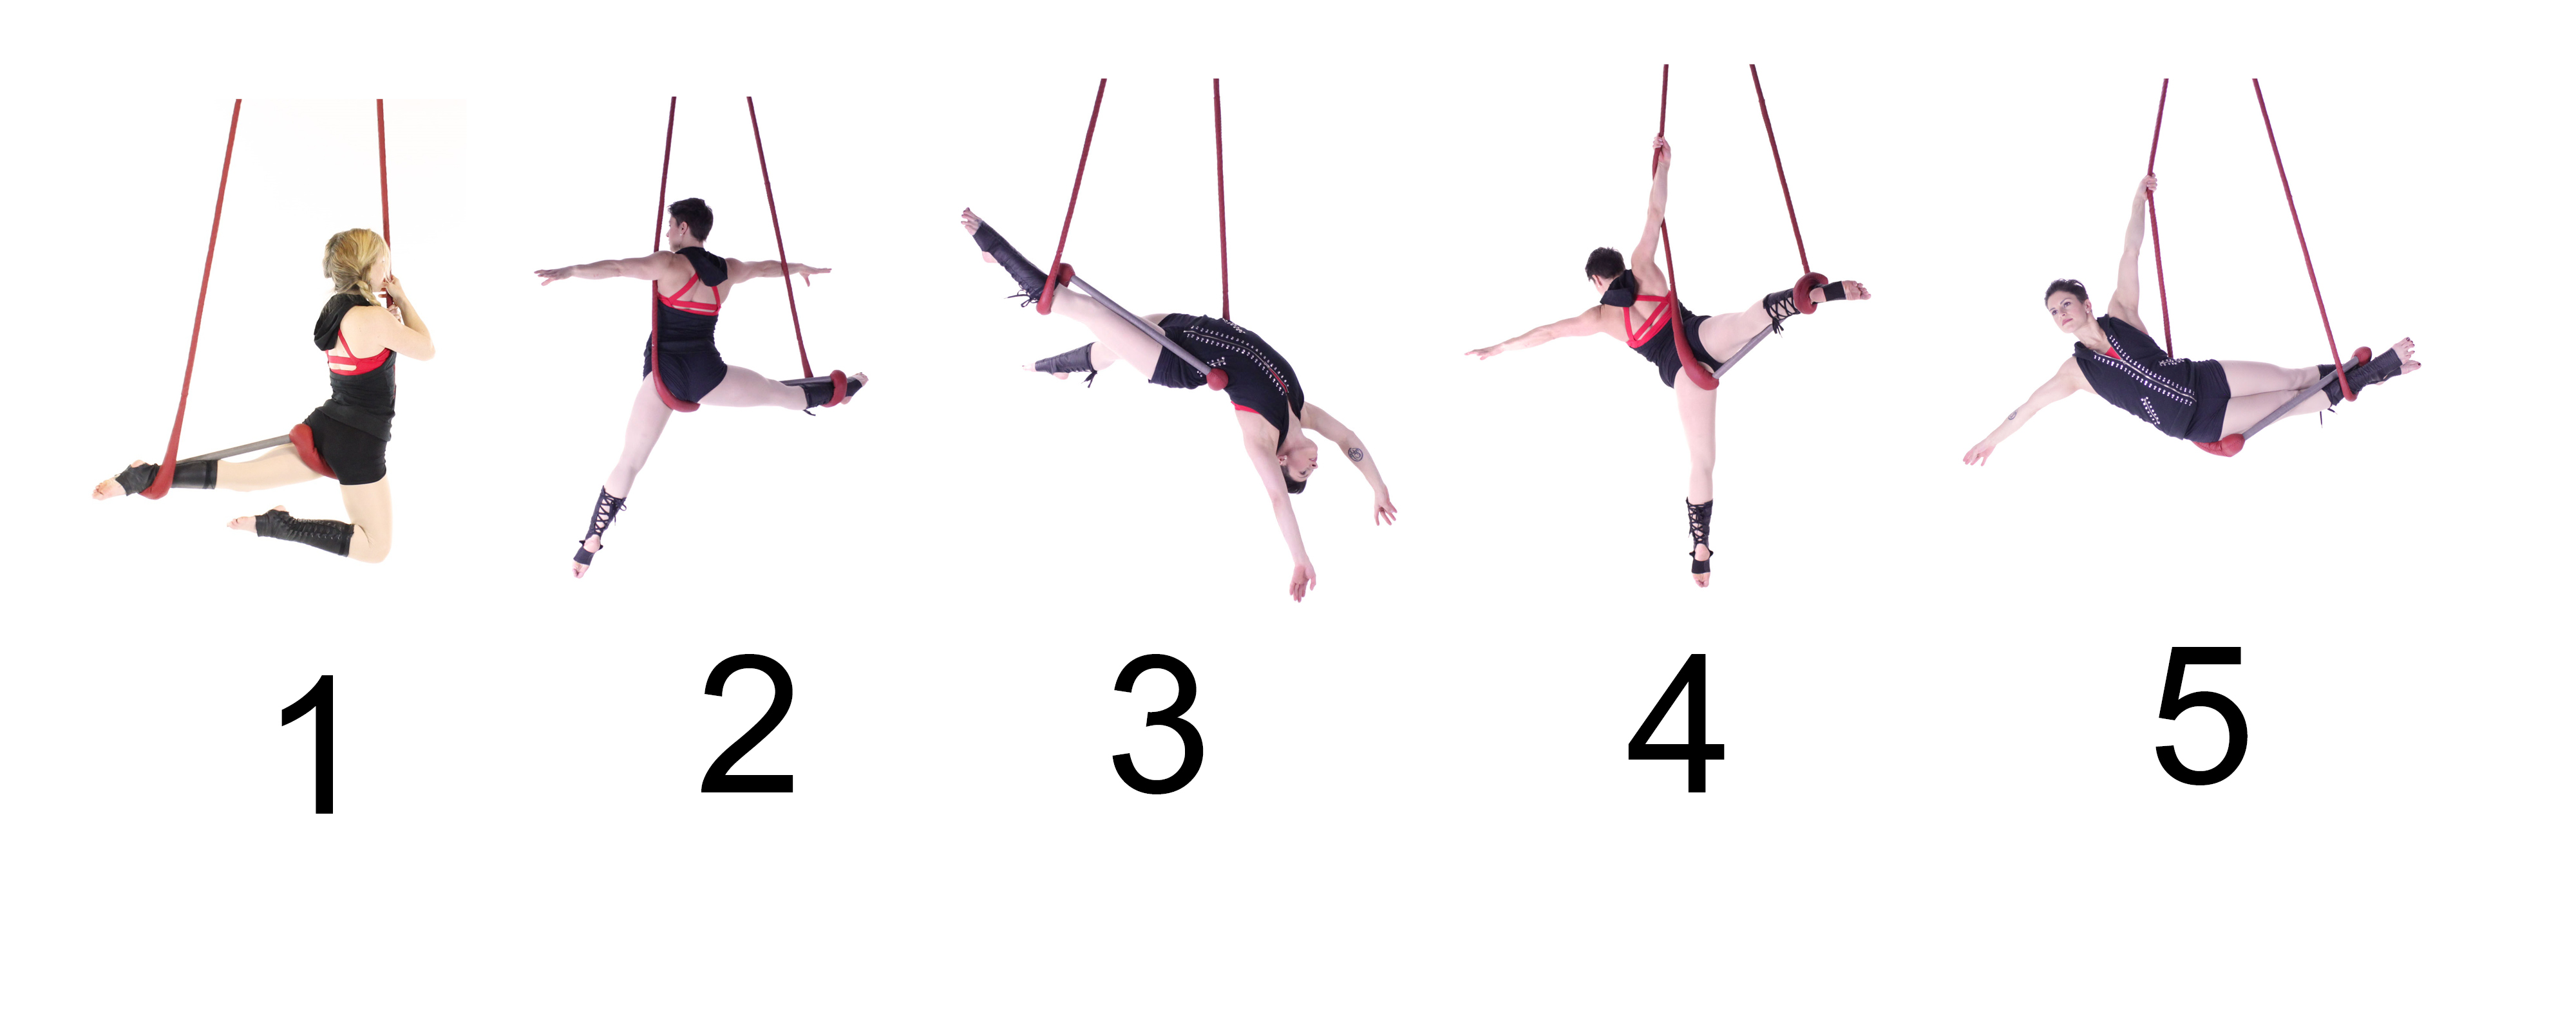 Trapeze Contributions By Guest Artist McKinley Vitale | Www.